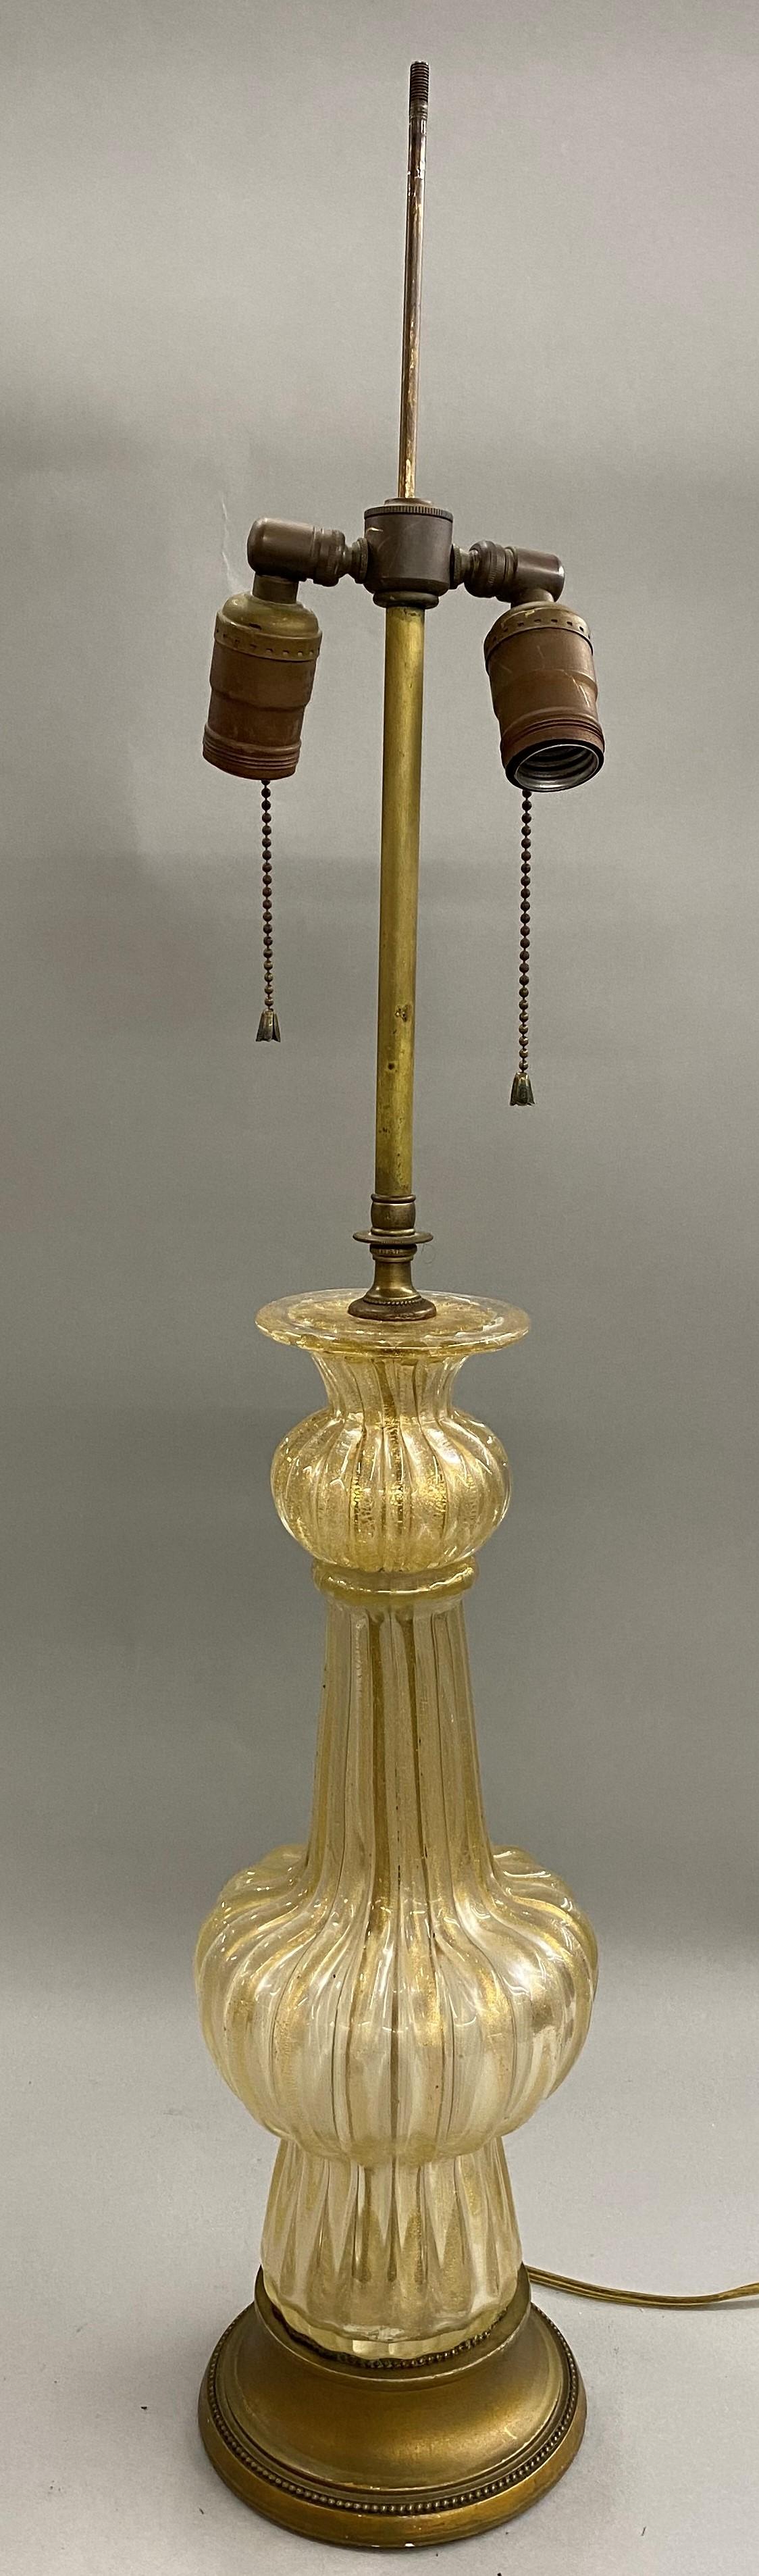 Pair of Barovier Venetian Glass Table Lamps with 22-Karat Gold Dust Inclusions 1